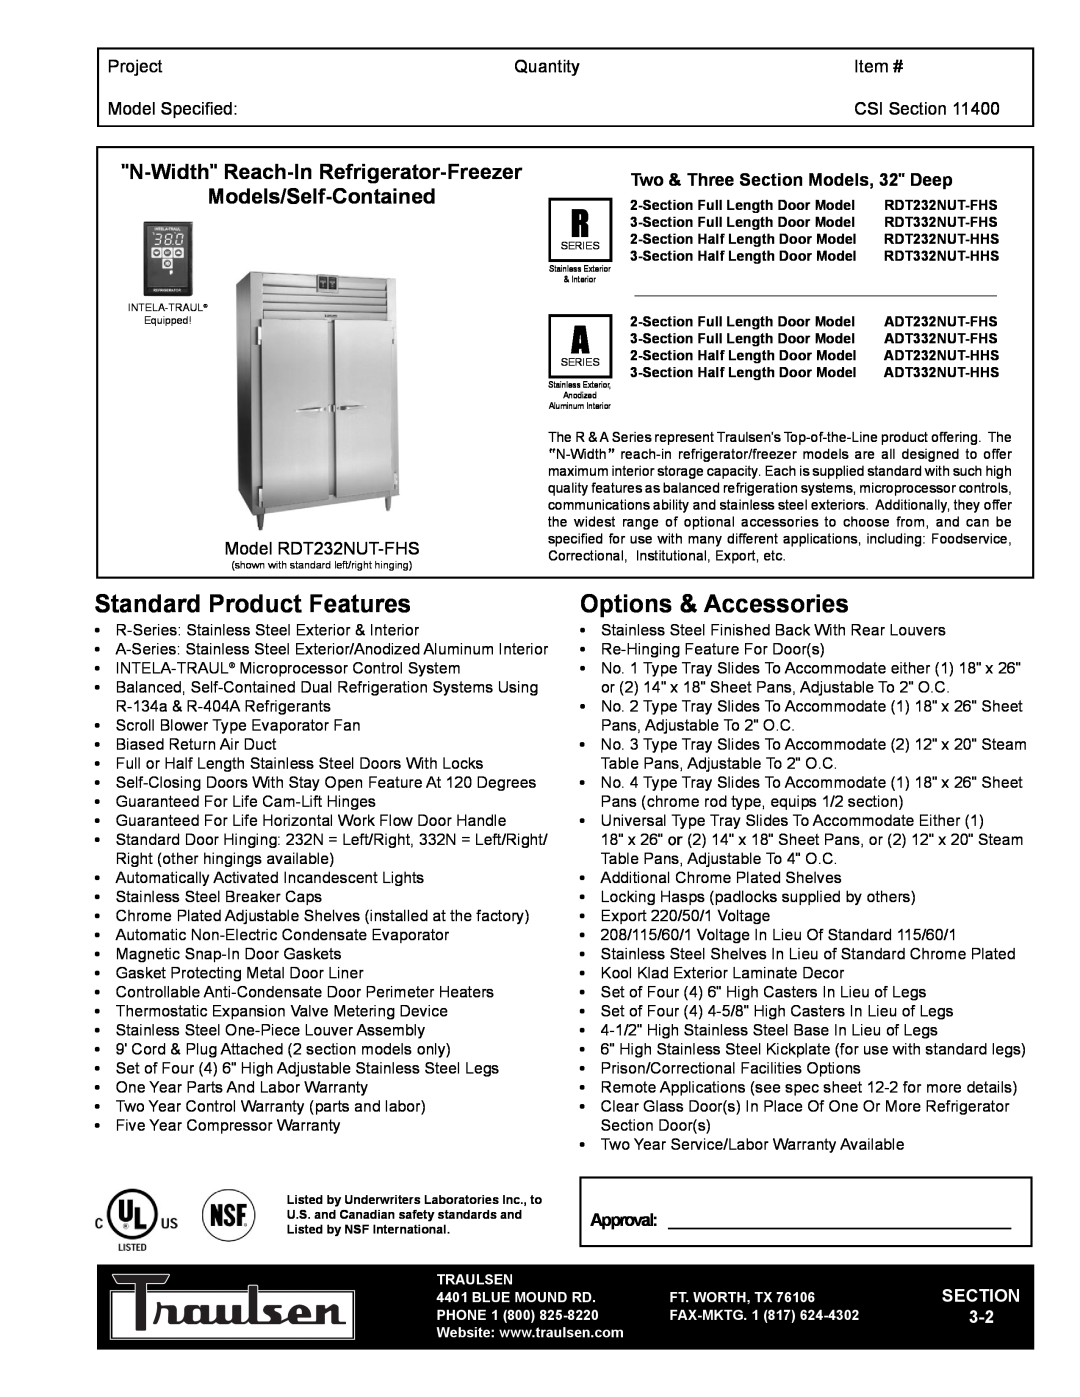 Traulsen RDT332NUT-HHS warranty N-Width Reach-In Refrigerator-Freezer, Models/Self-Contained, Project, Quantity, Item # 